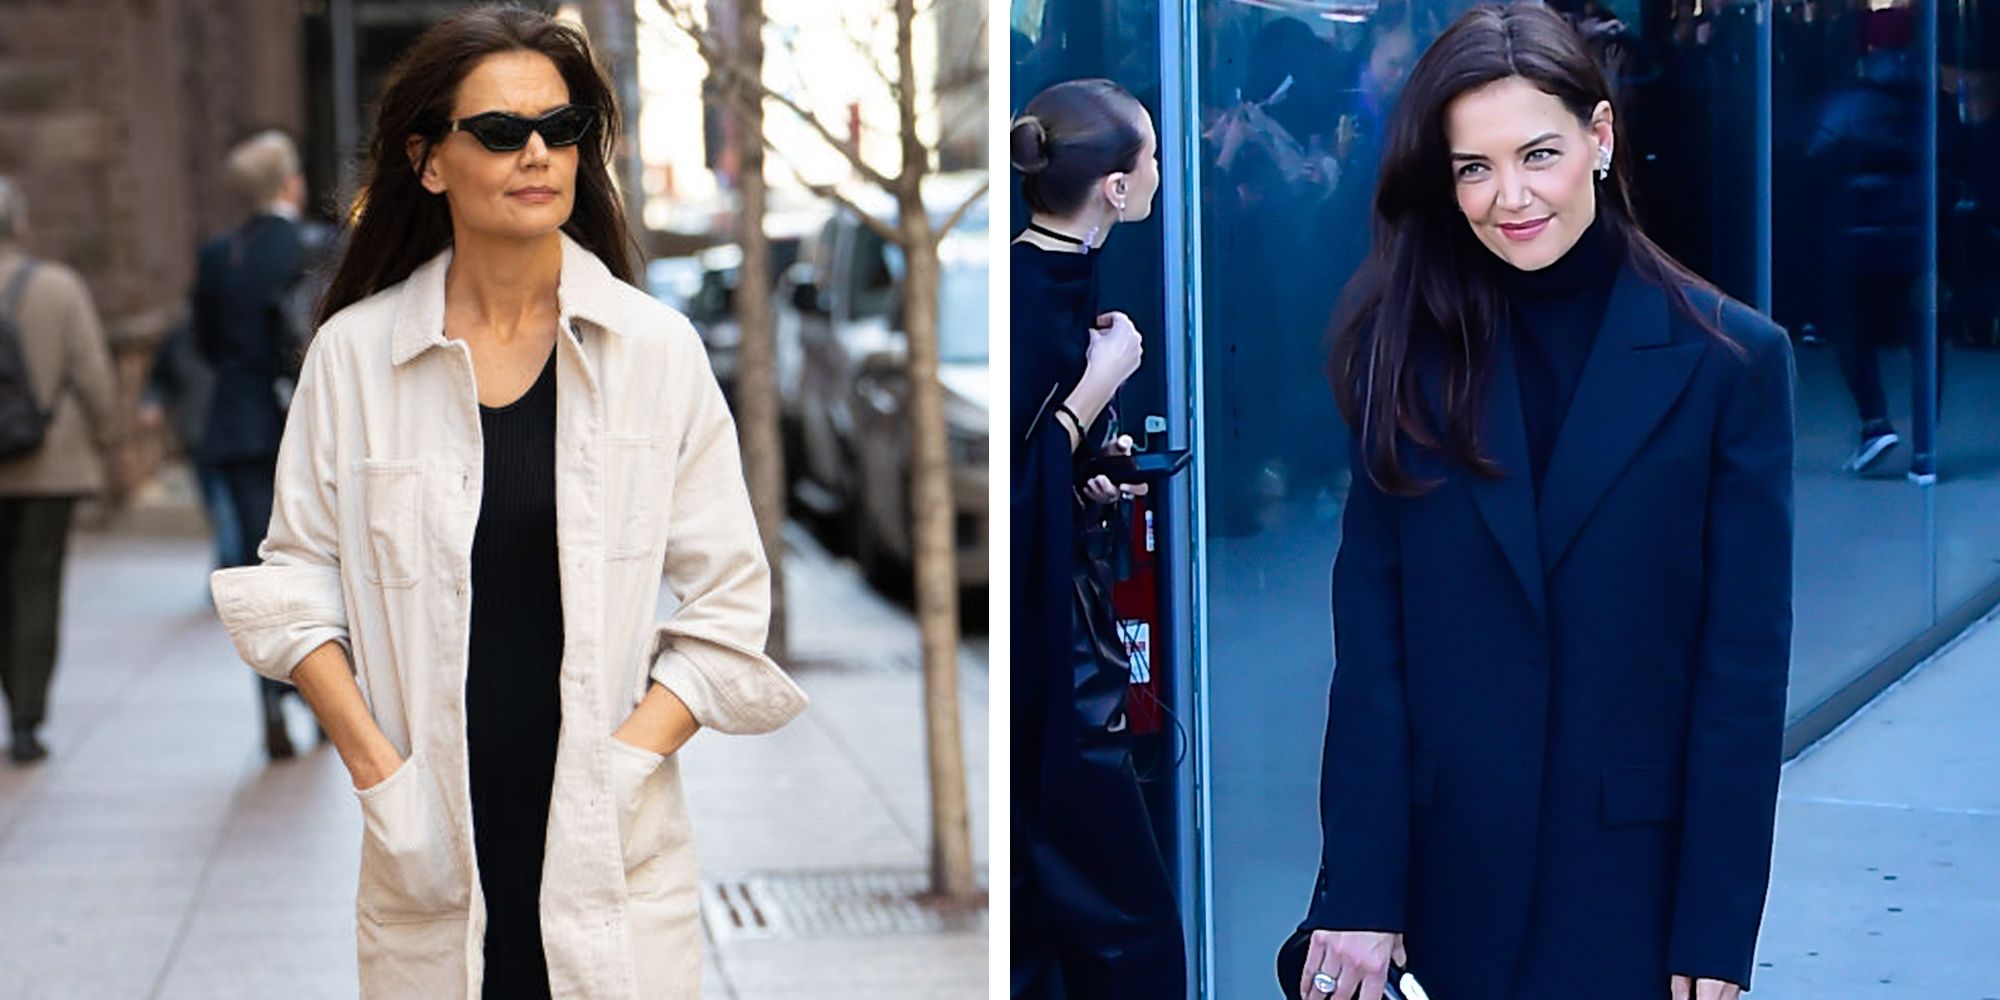 Katie Holmes New York City October 19, 2019 – Star Style